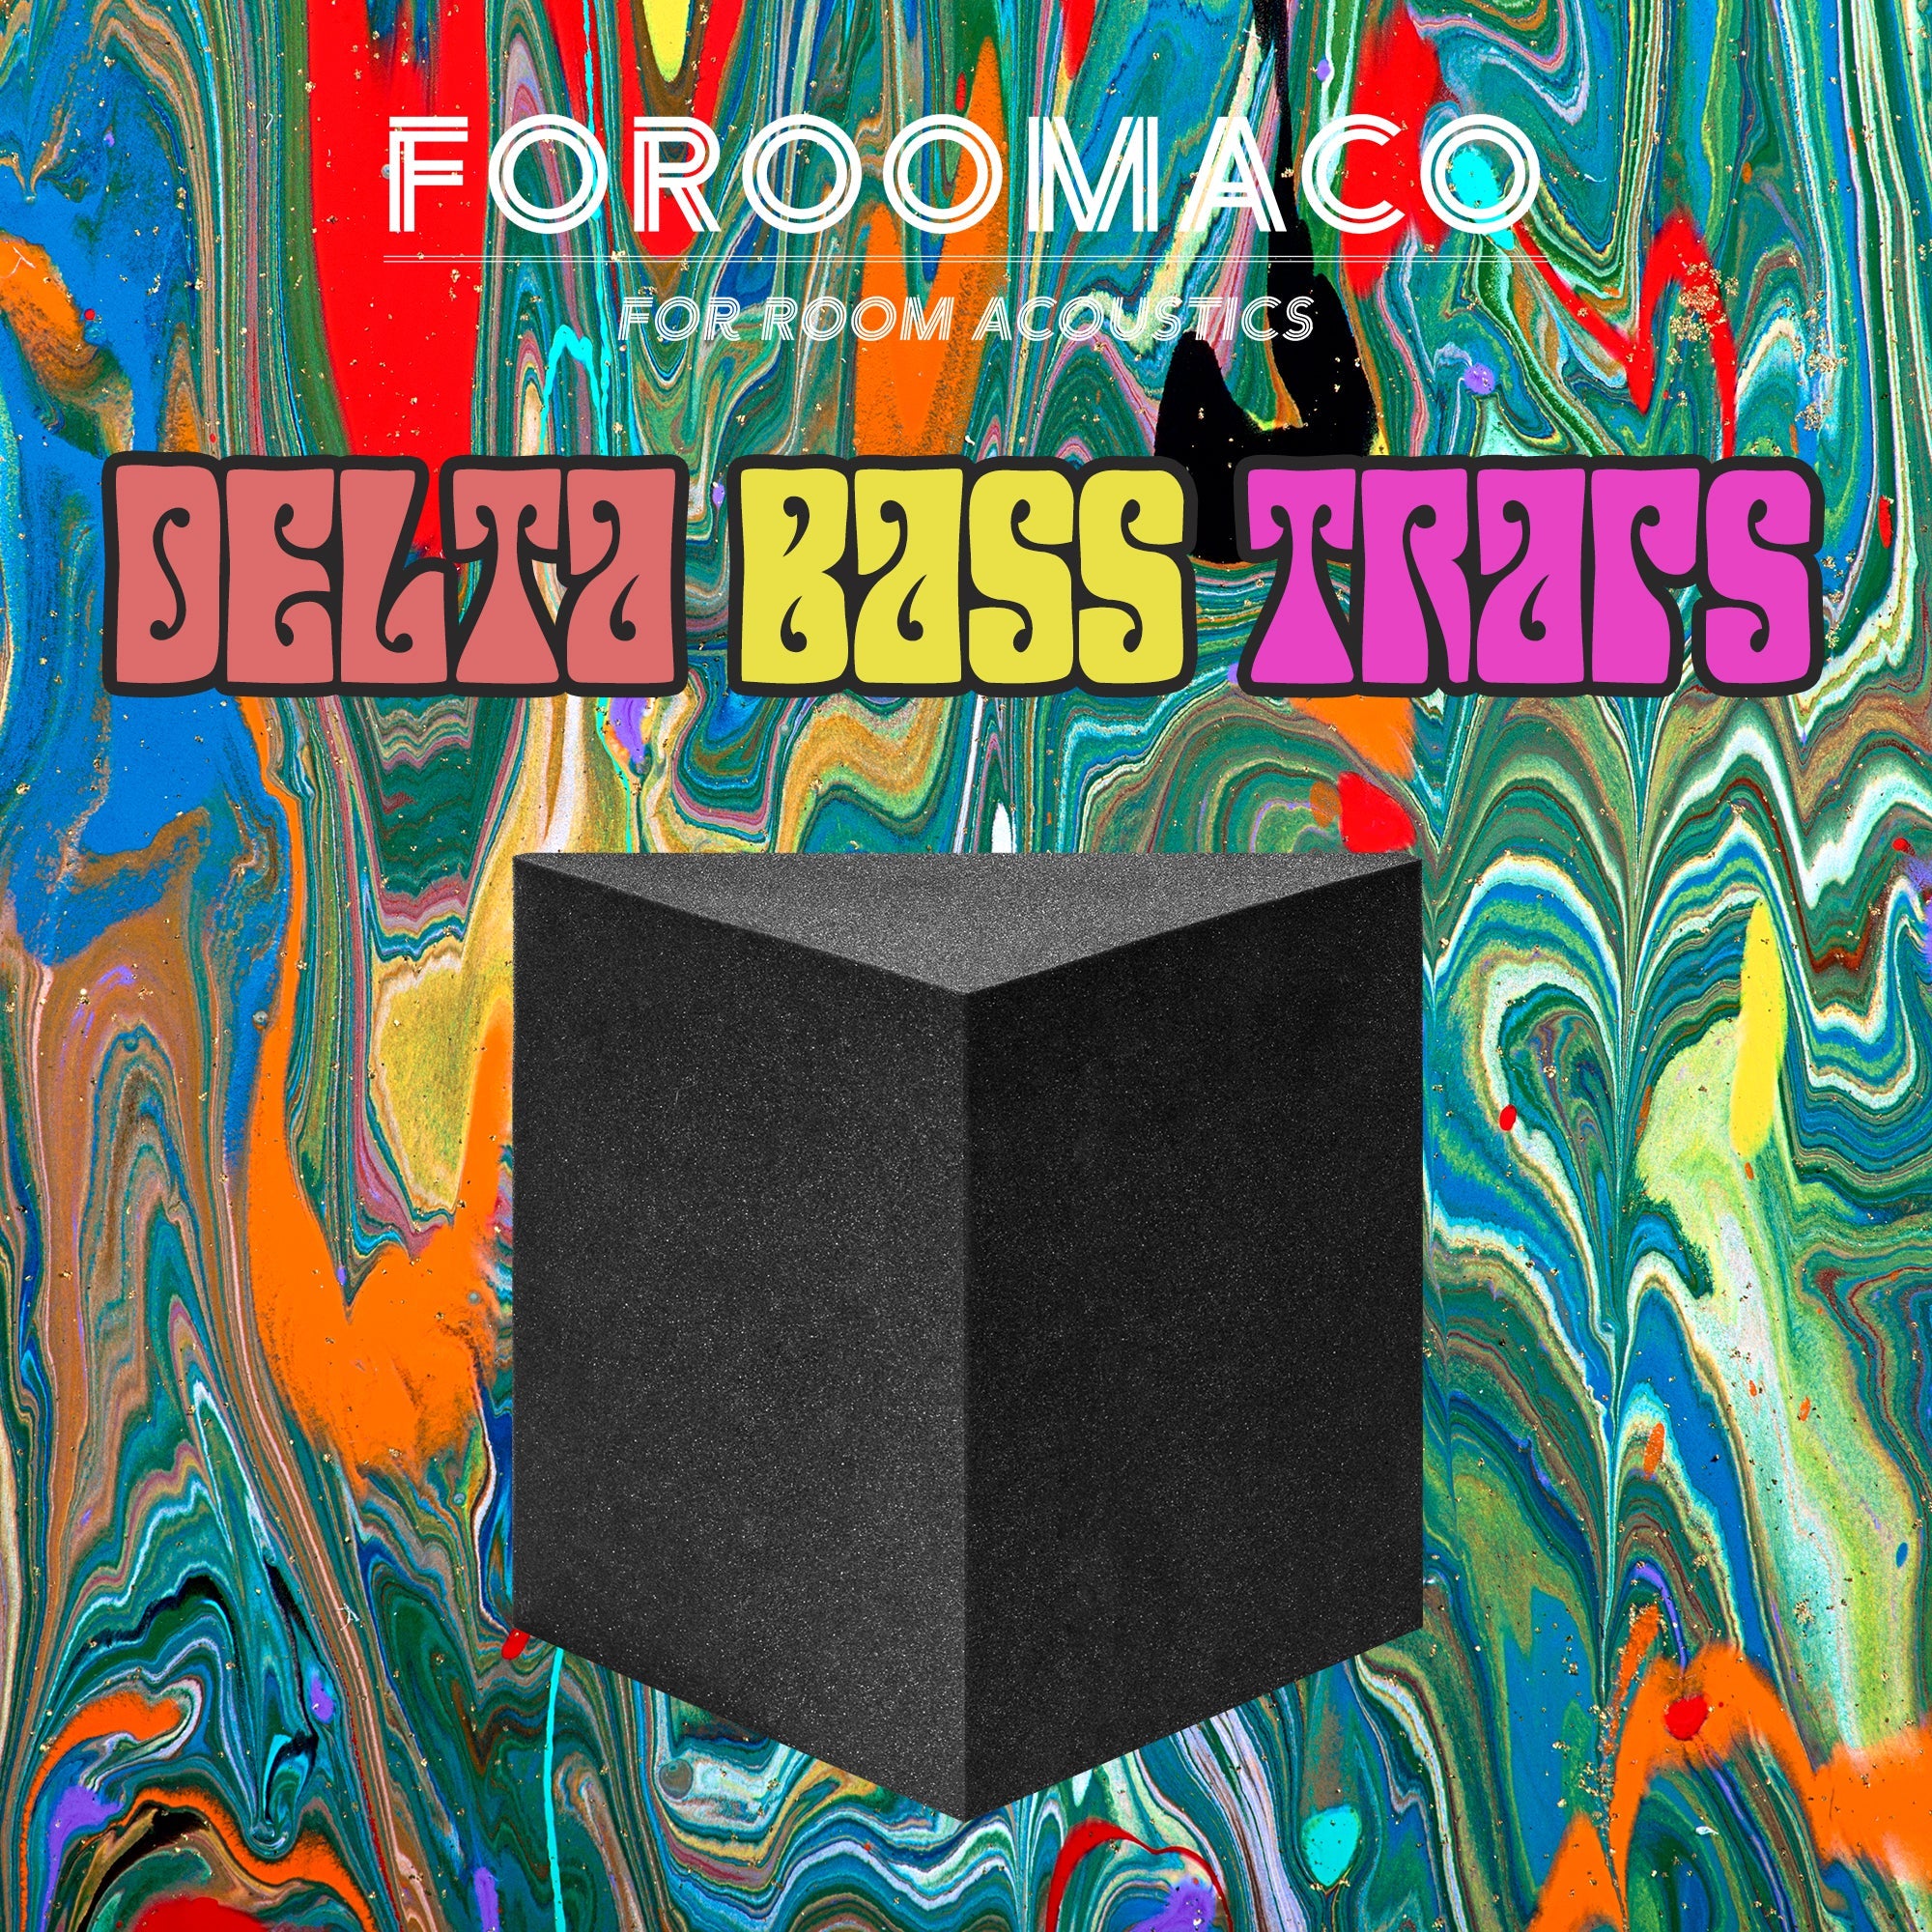 Foroomaco Delta bass traps 60s style vintage psychedelic style poster